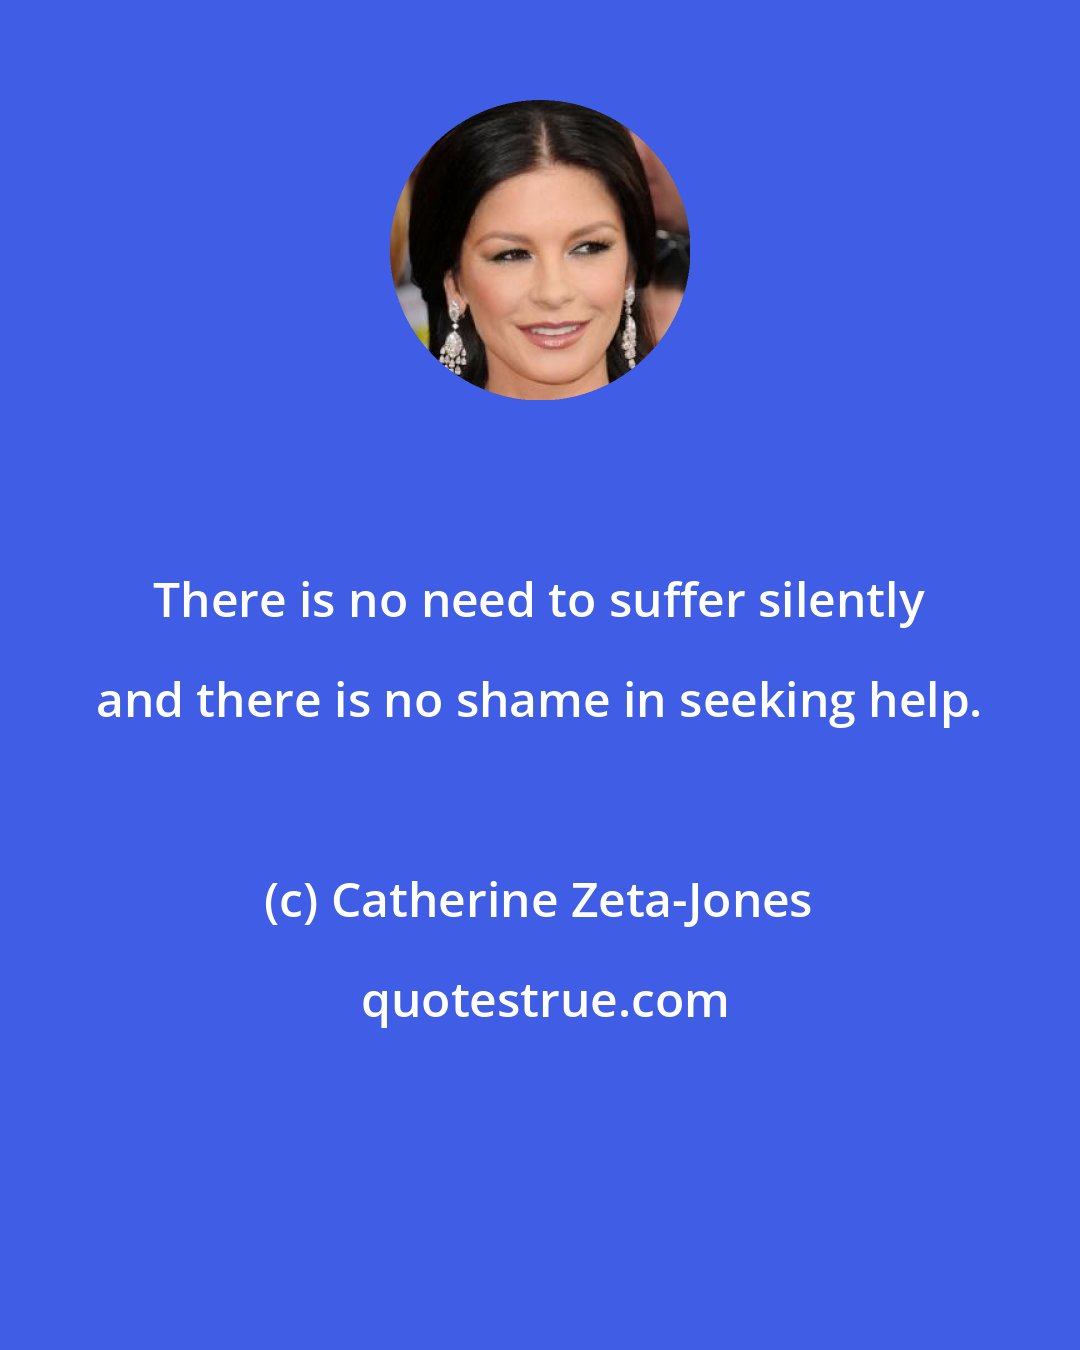 Catherine Zeta-Jones: There is no need to suffer silently and there is no shame in seeking help.